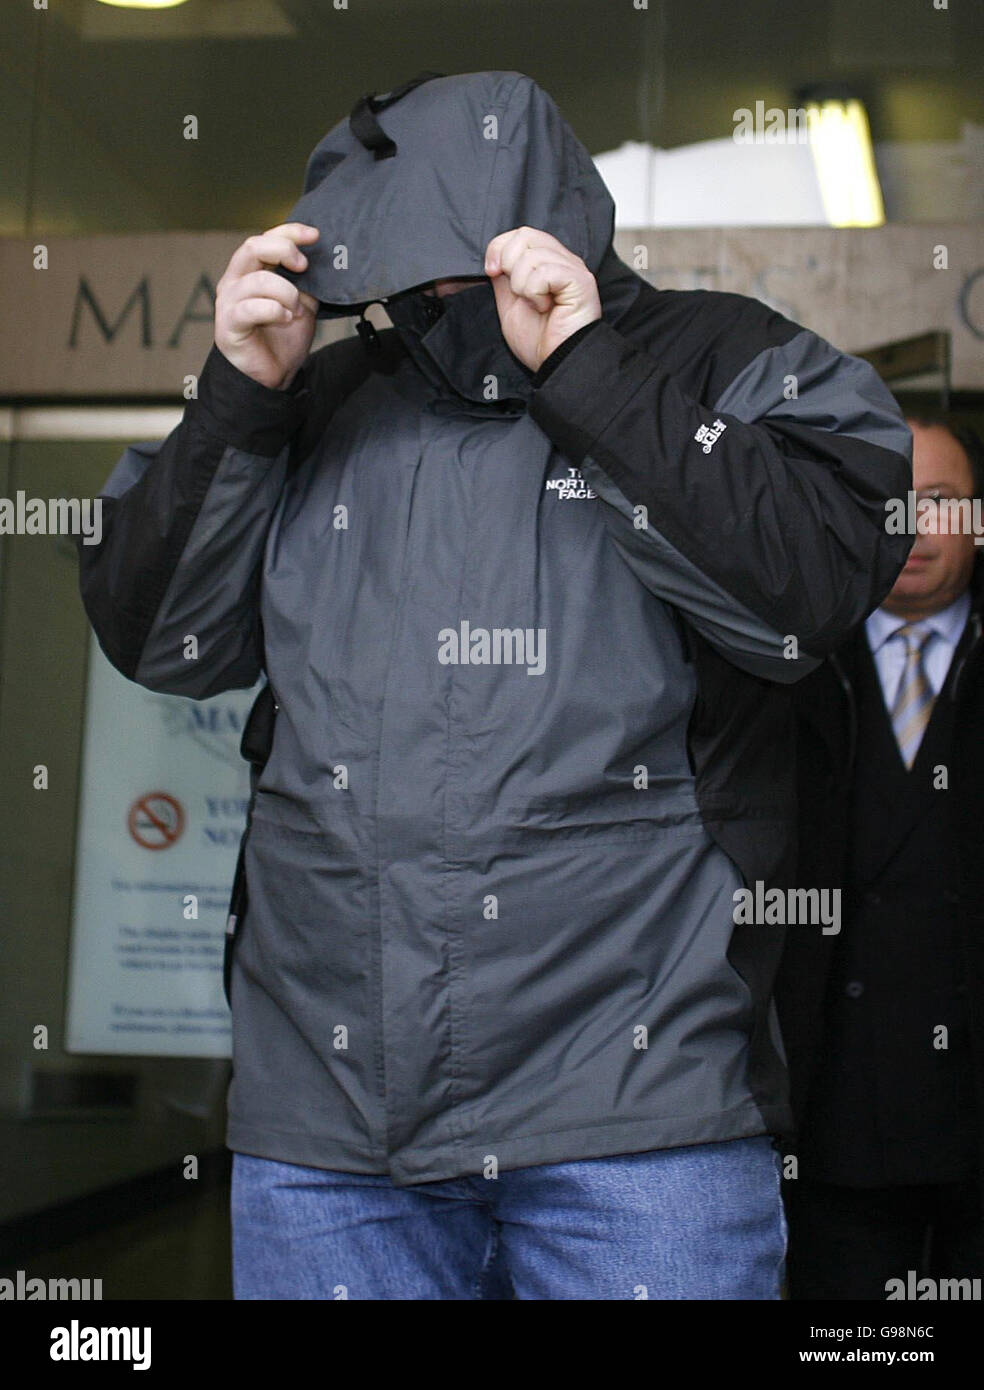 Graham Sankey leaves Liverpool Magistrates Court, Thursday March 9 2006 where he faced a banning order preventing him travelling to the World Cup in Germany. Sankey confessed to a crime for which a British teenager is serving 15 years in a Bulgarian prison and appeared in court today facing a ban from all football matches in the UK and abroad. Graham Sankey, 20, from Liverpool, made a written confession to throwing a brick at a Bulgarian man during a fight in the Golden Sands resort, in Varna, in May, last year. See PA story COURTS Shields. PRESS ASSOCIATION photo. Picture credit should read: Stock Photo